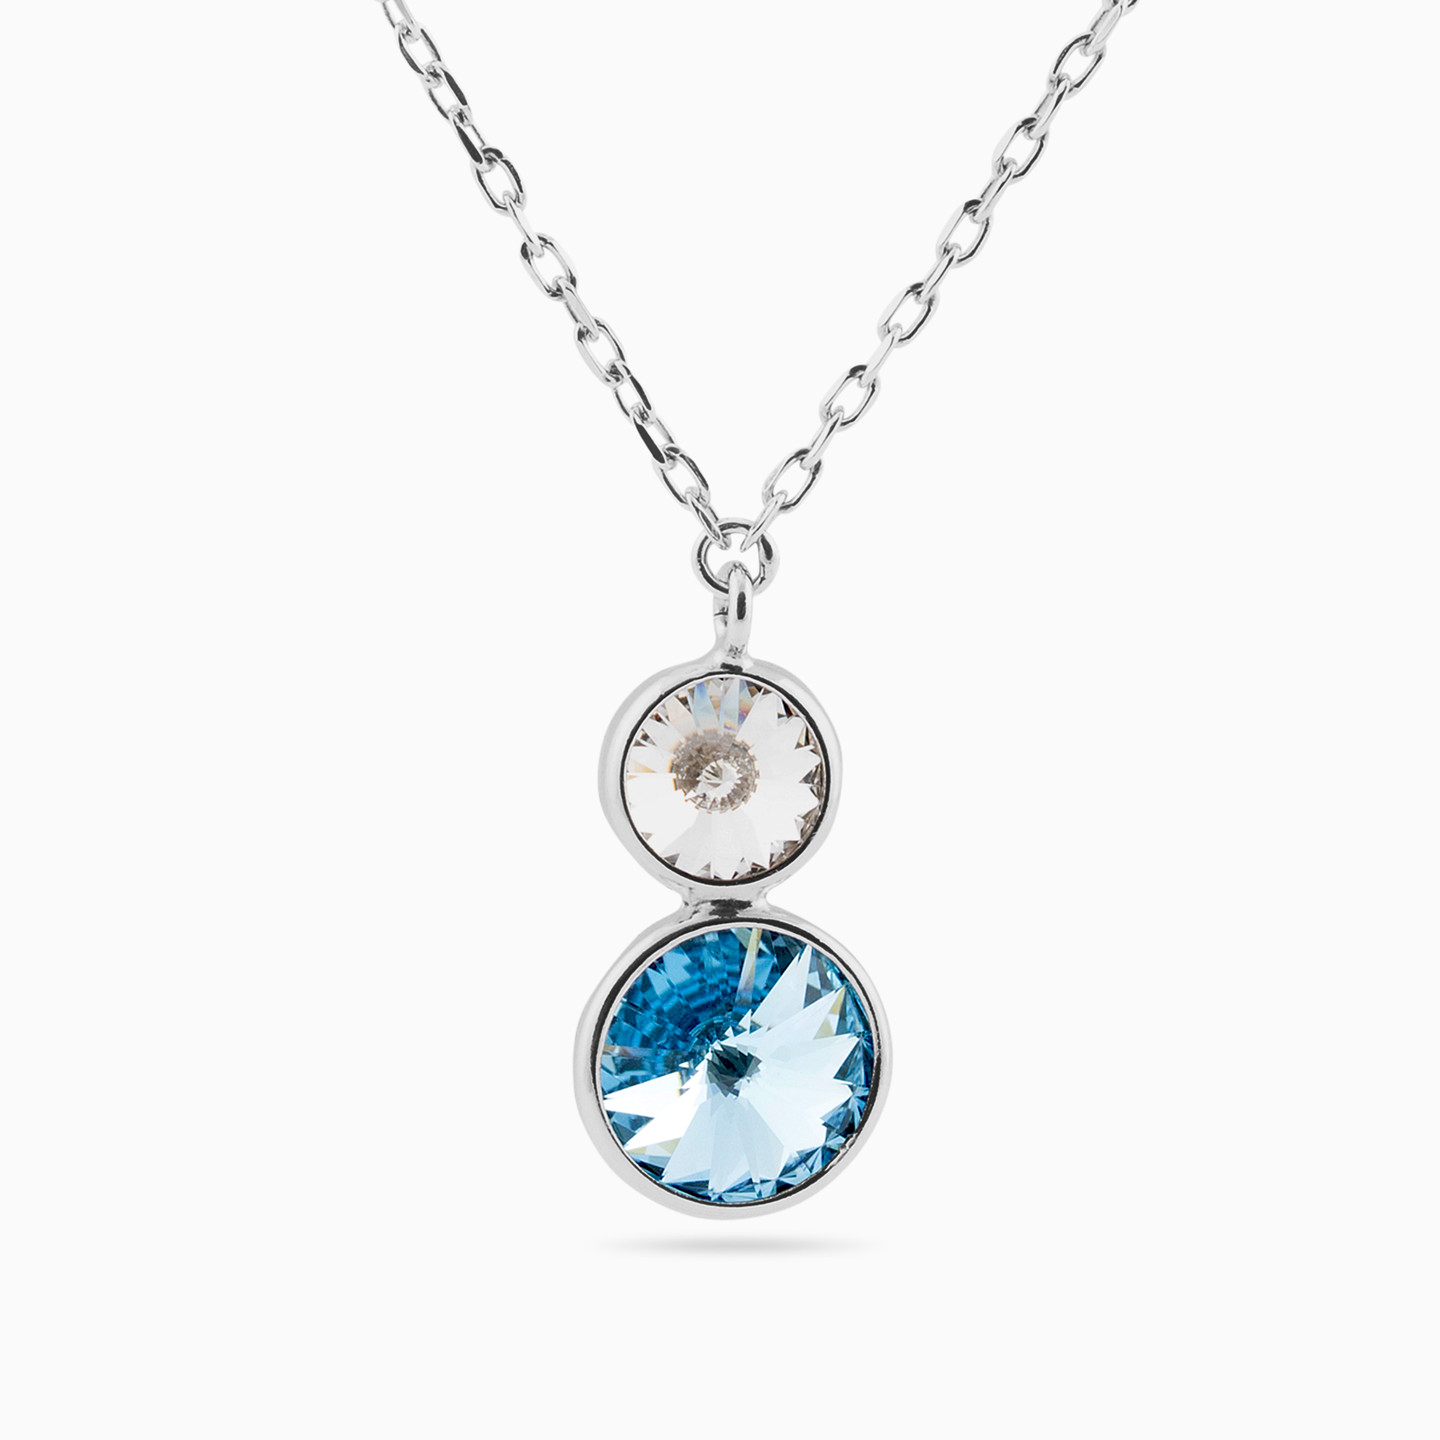 Sterling Silver Colored Stones Pendant Necklace